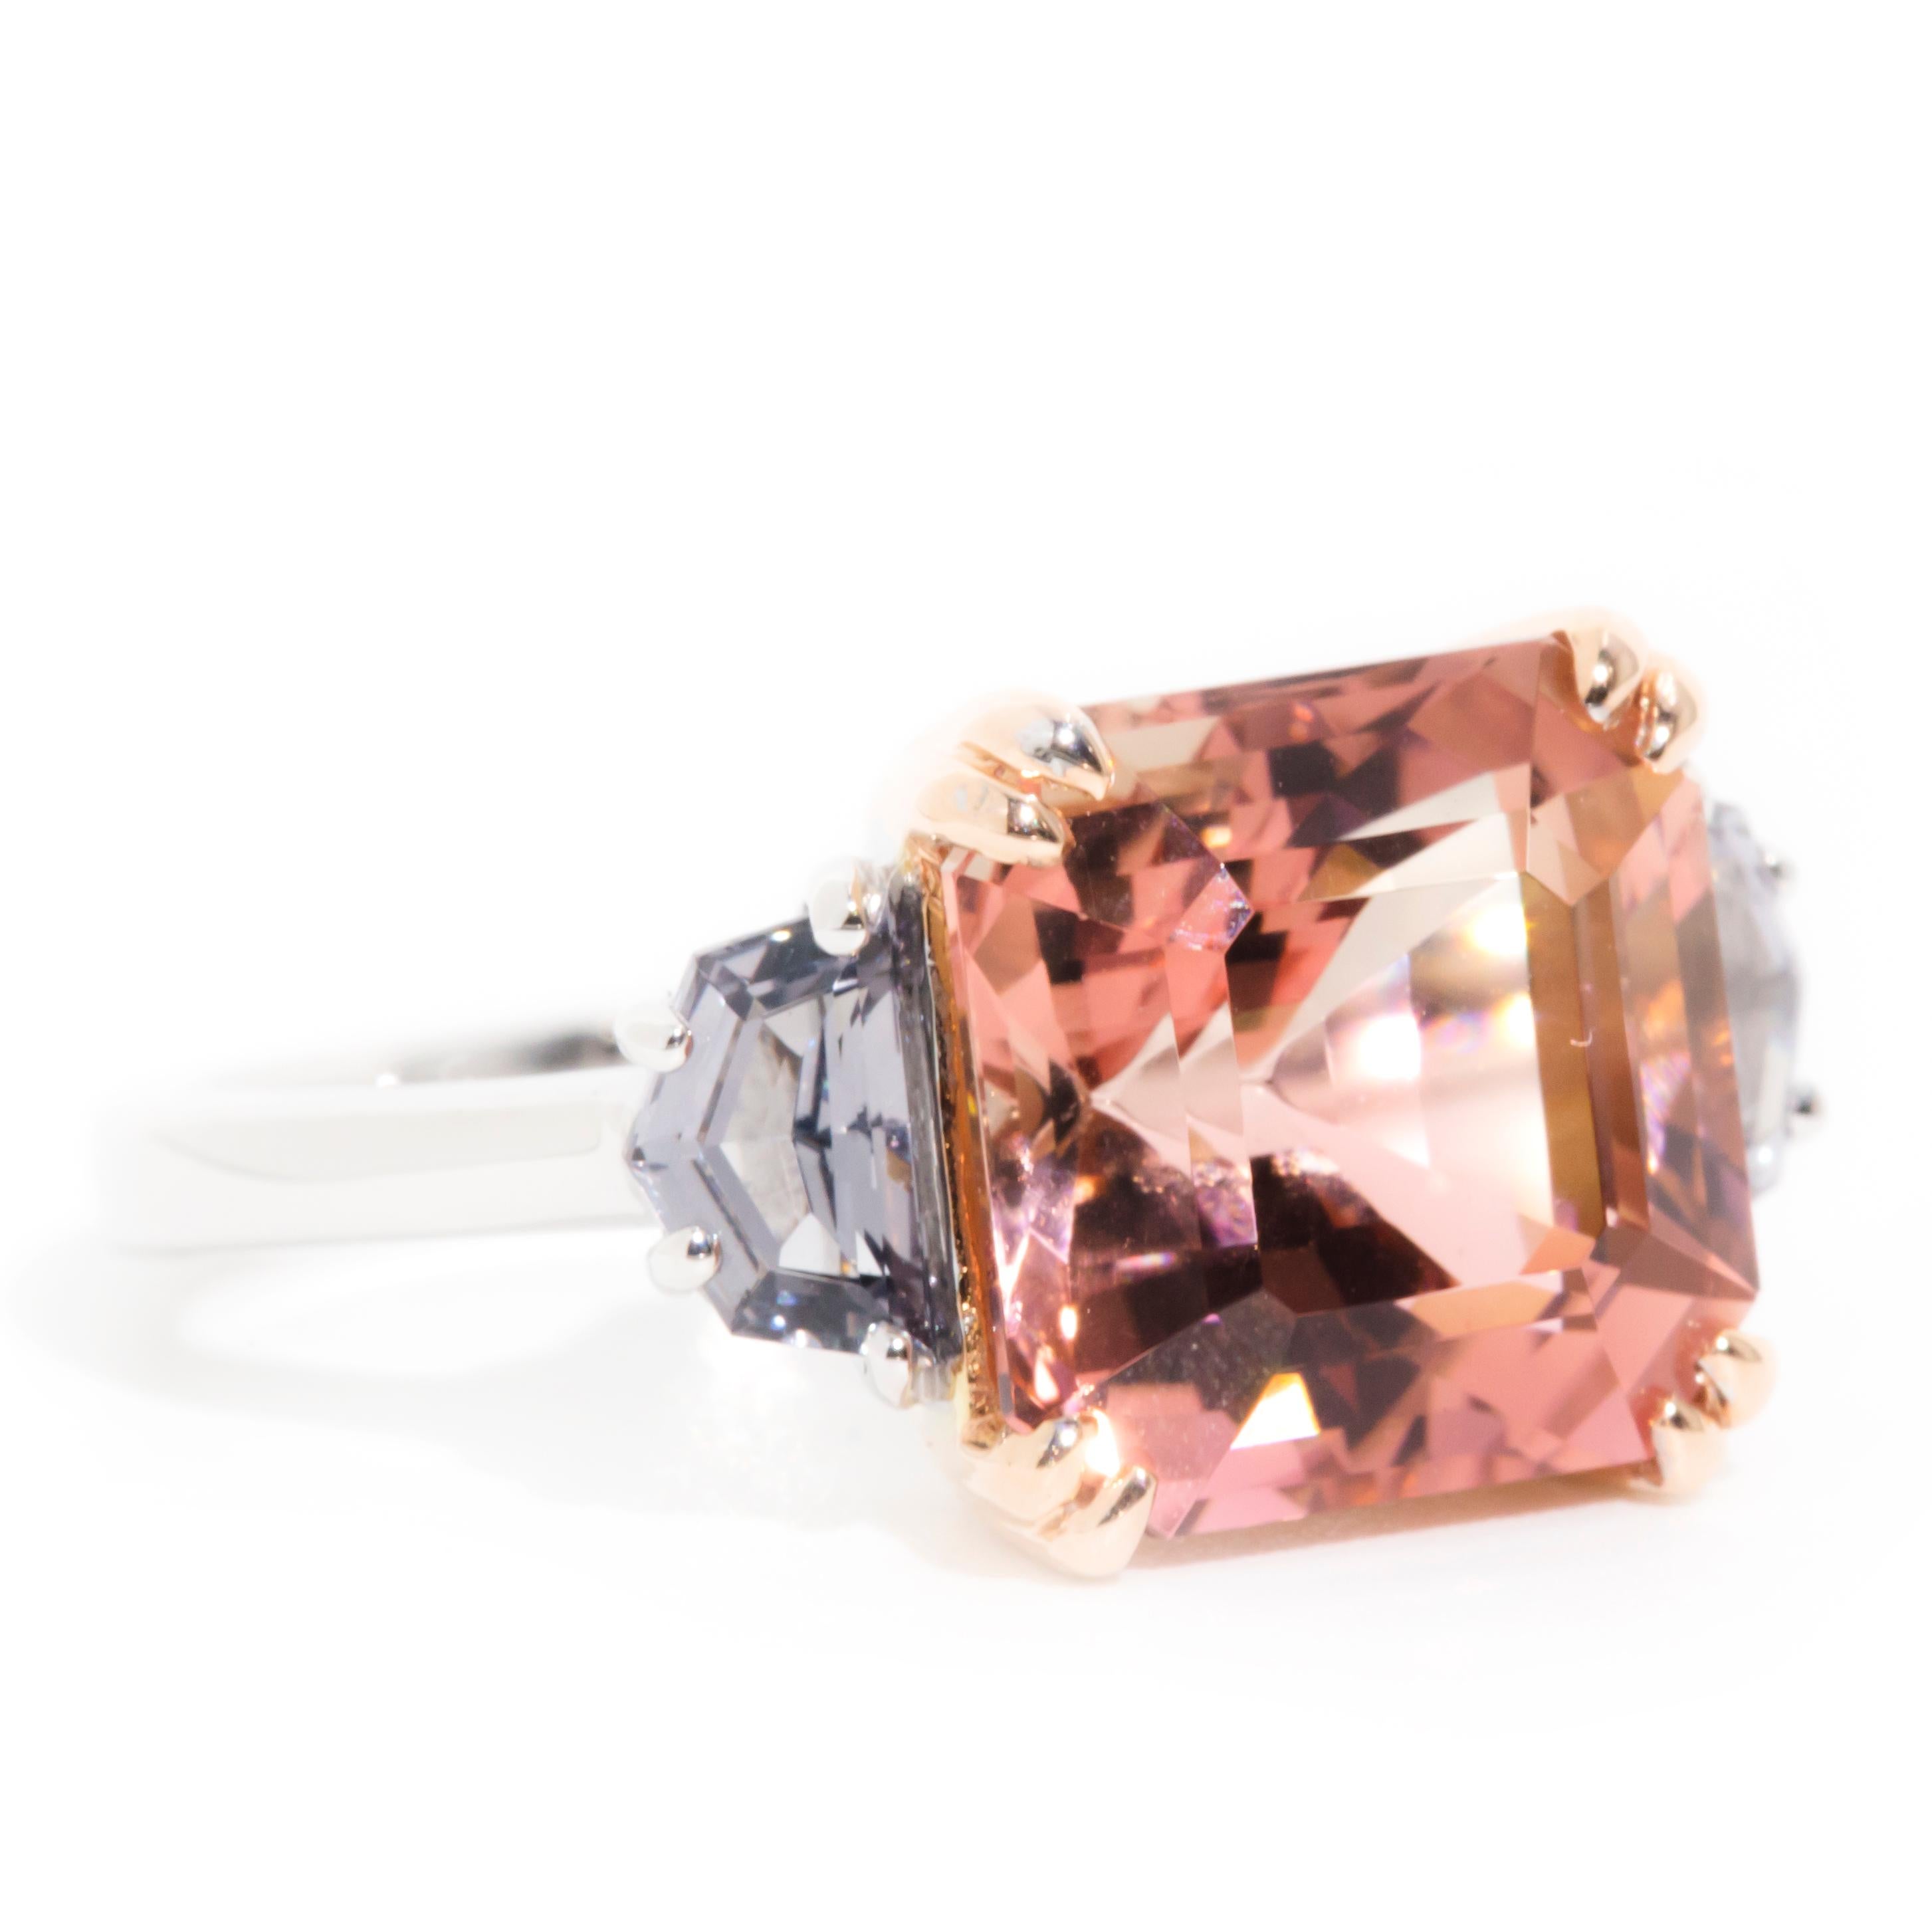 Lovingly crafted in 18 carat white gold, this delightful three-stone ring features a gleaming 5.93 carat bi-colour tourmaline flanked by a pair of enchanting purple spinels. This captivating ring has been named The Jimena Ring. She is as unique as